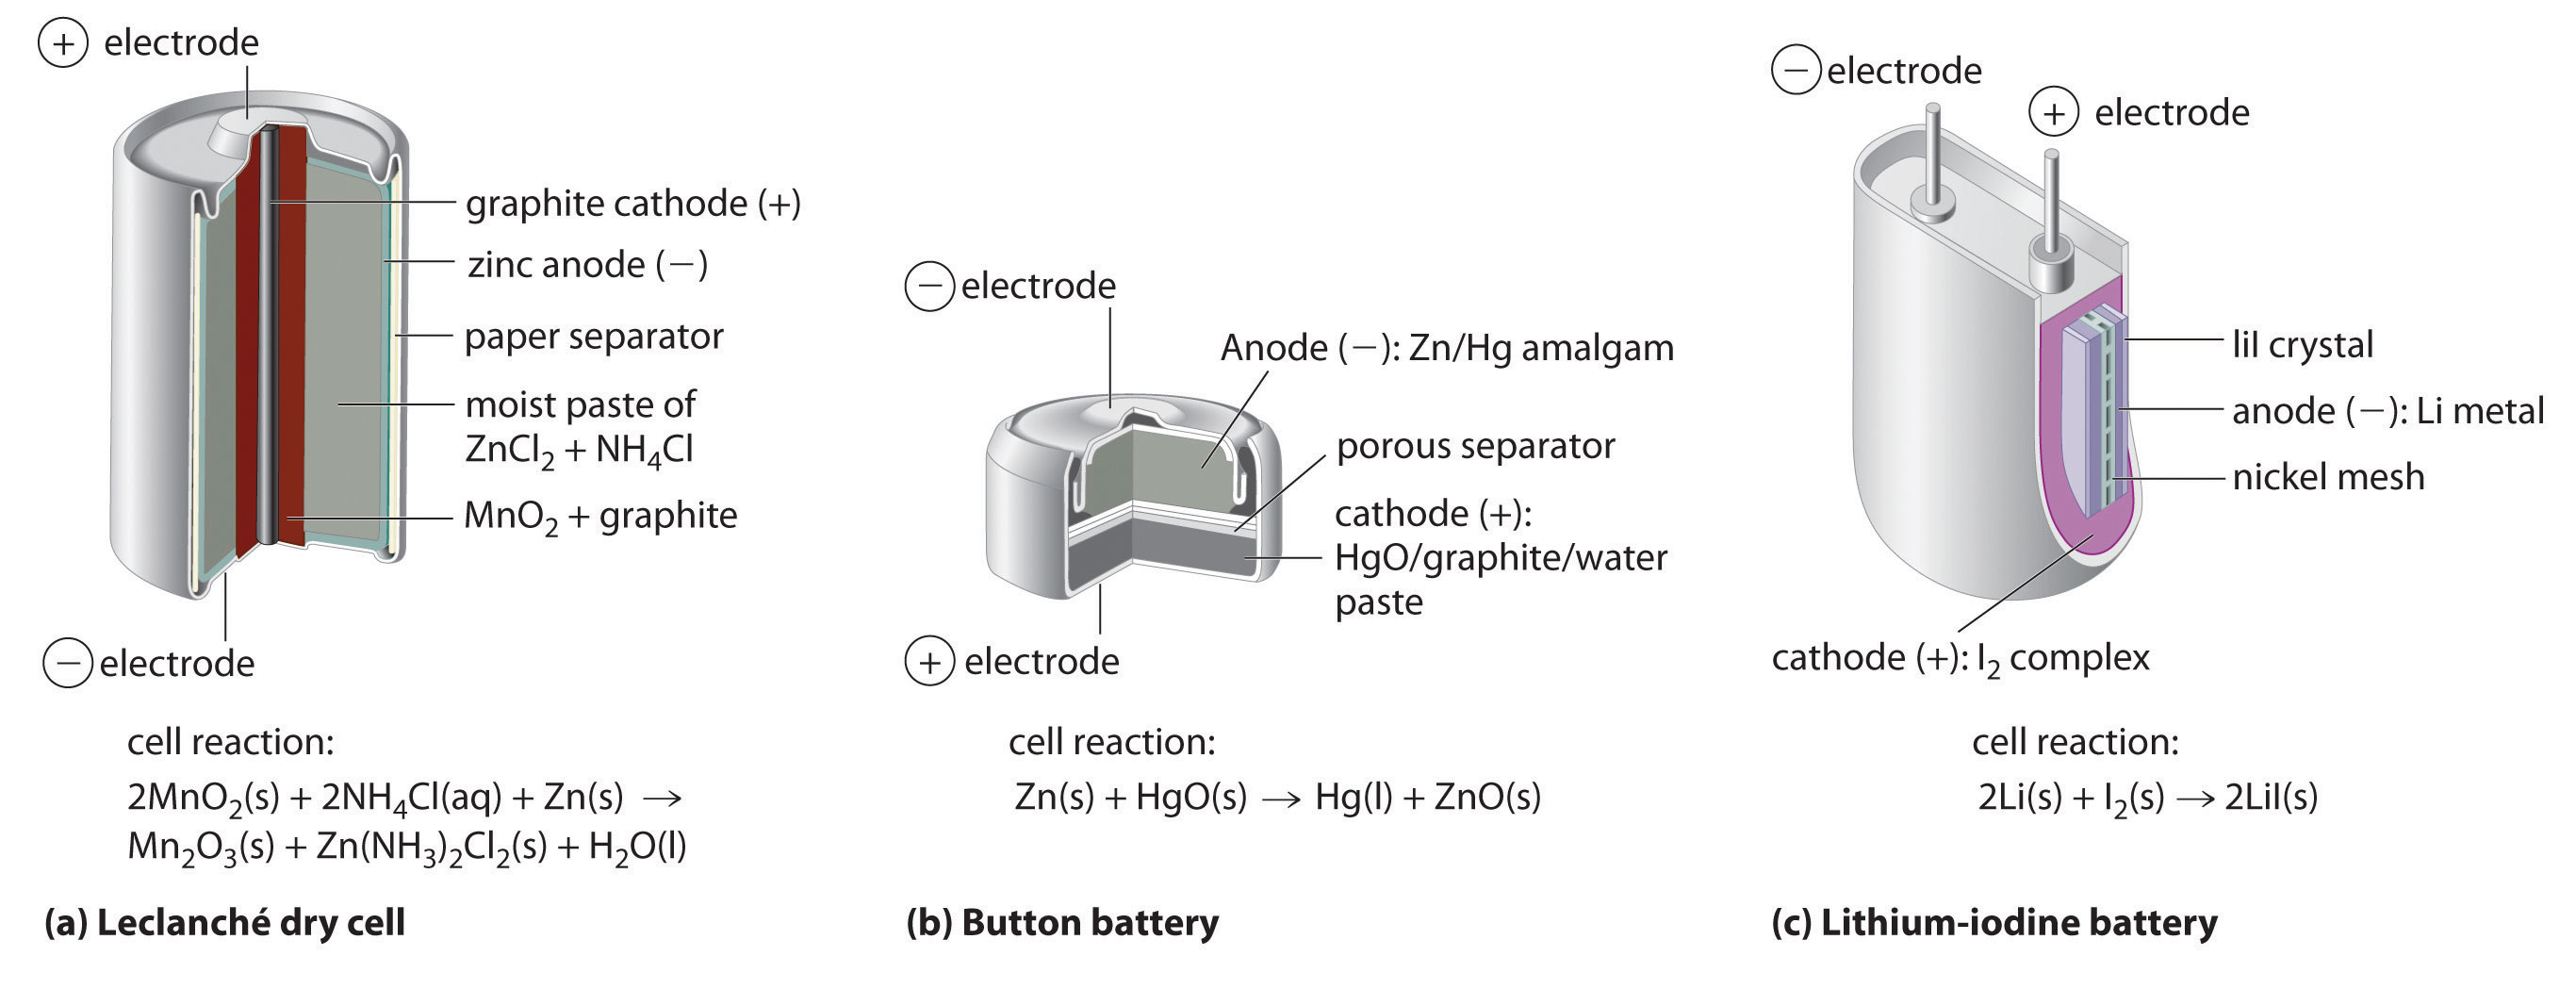 dry cell battery diagram